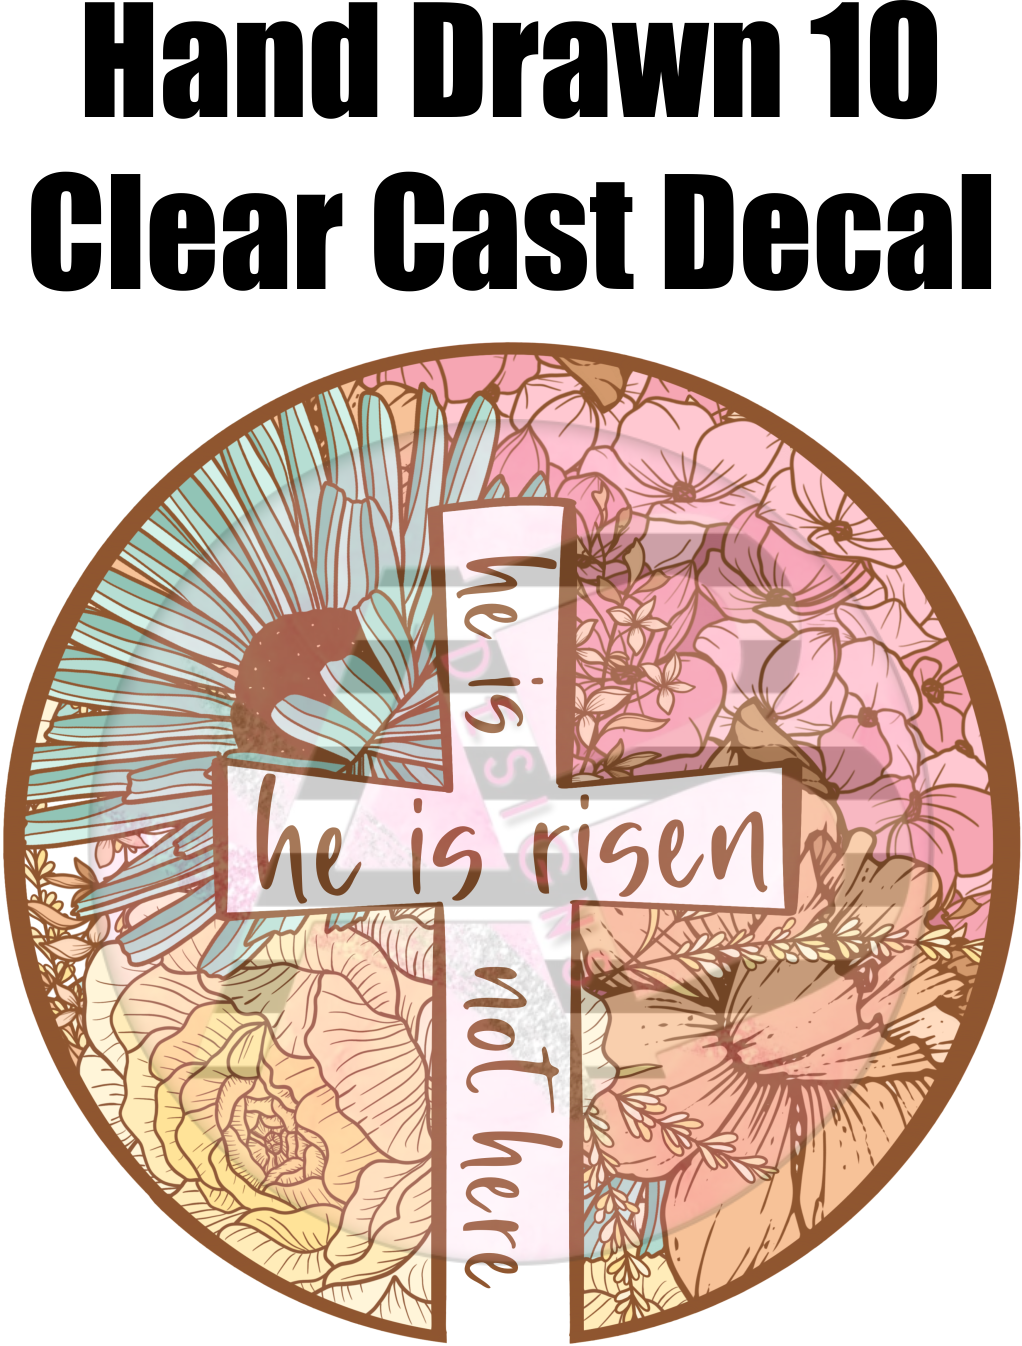 Hand Drawn 10 - Clear Cast Decal